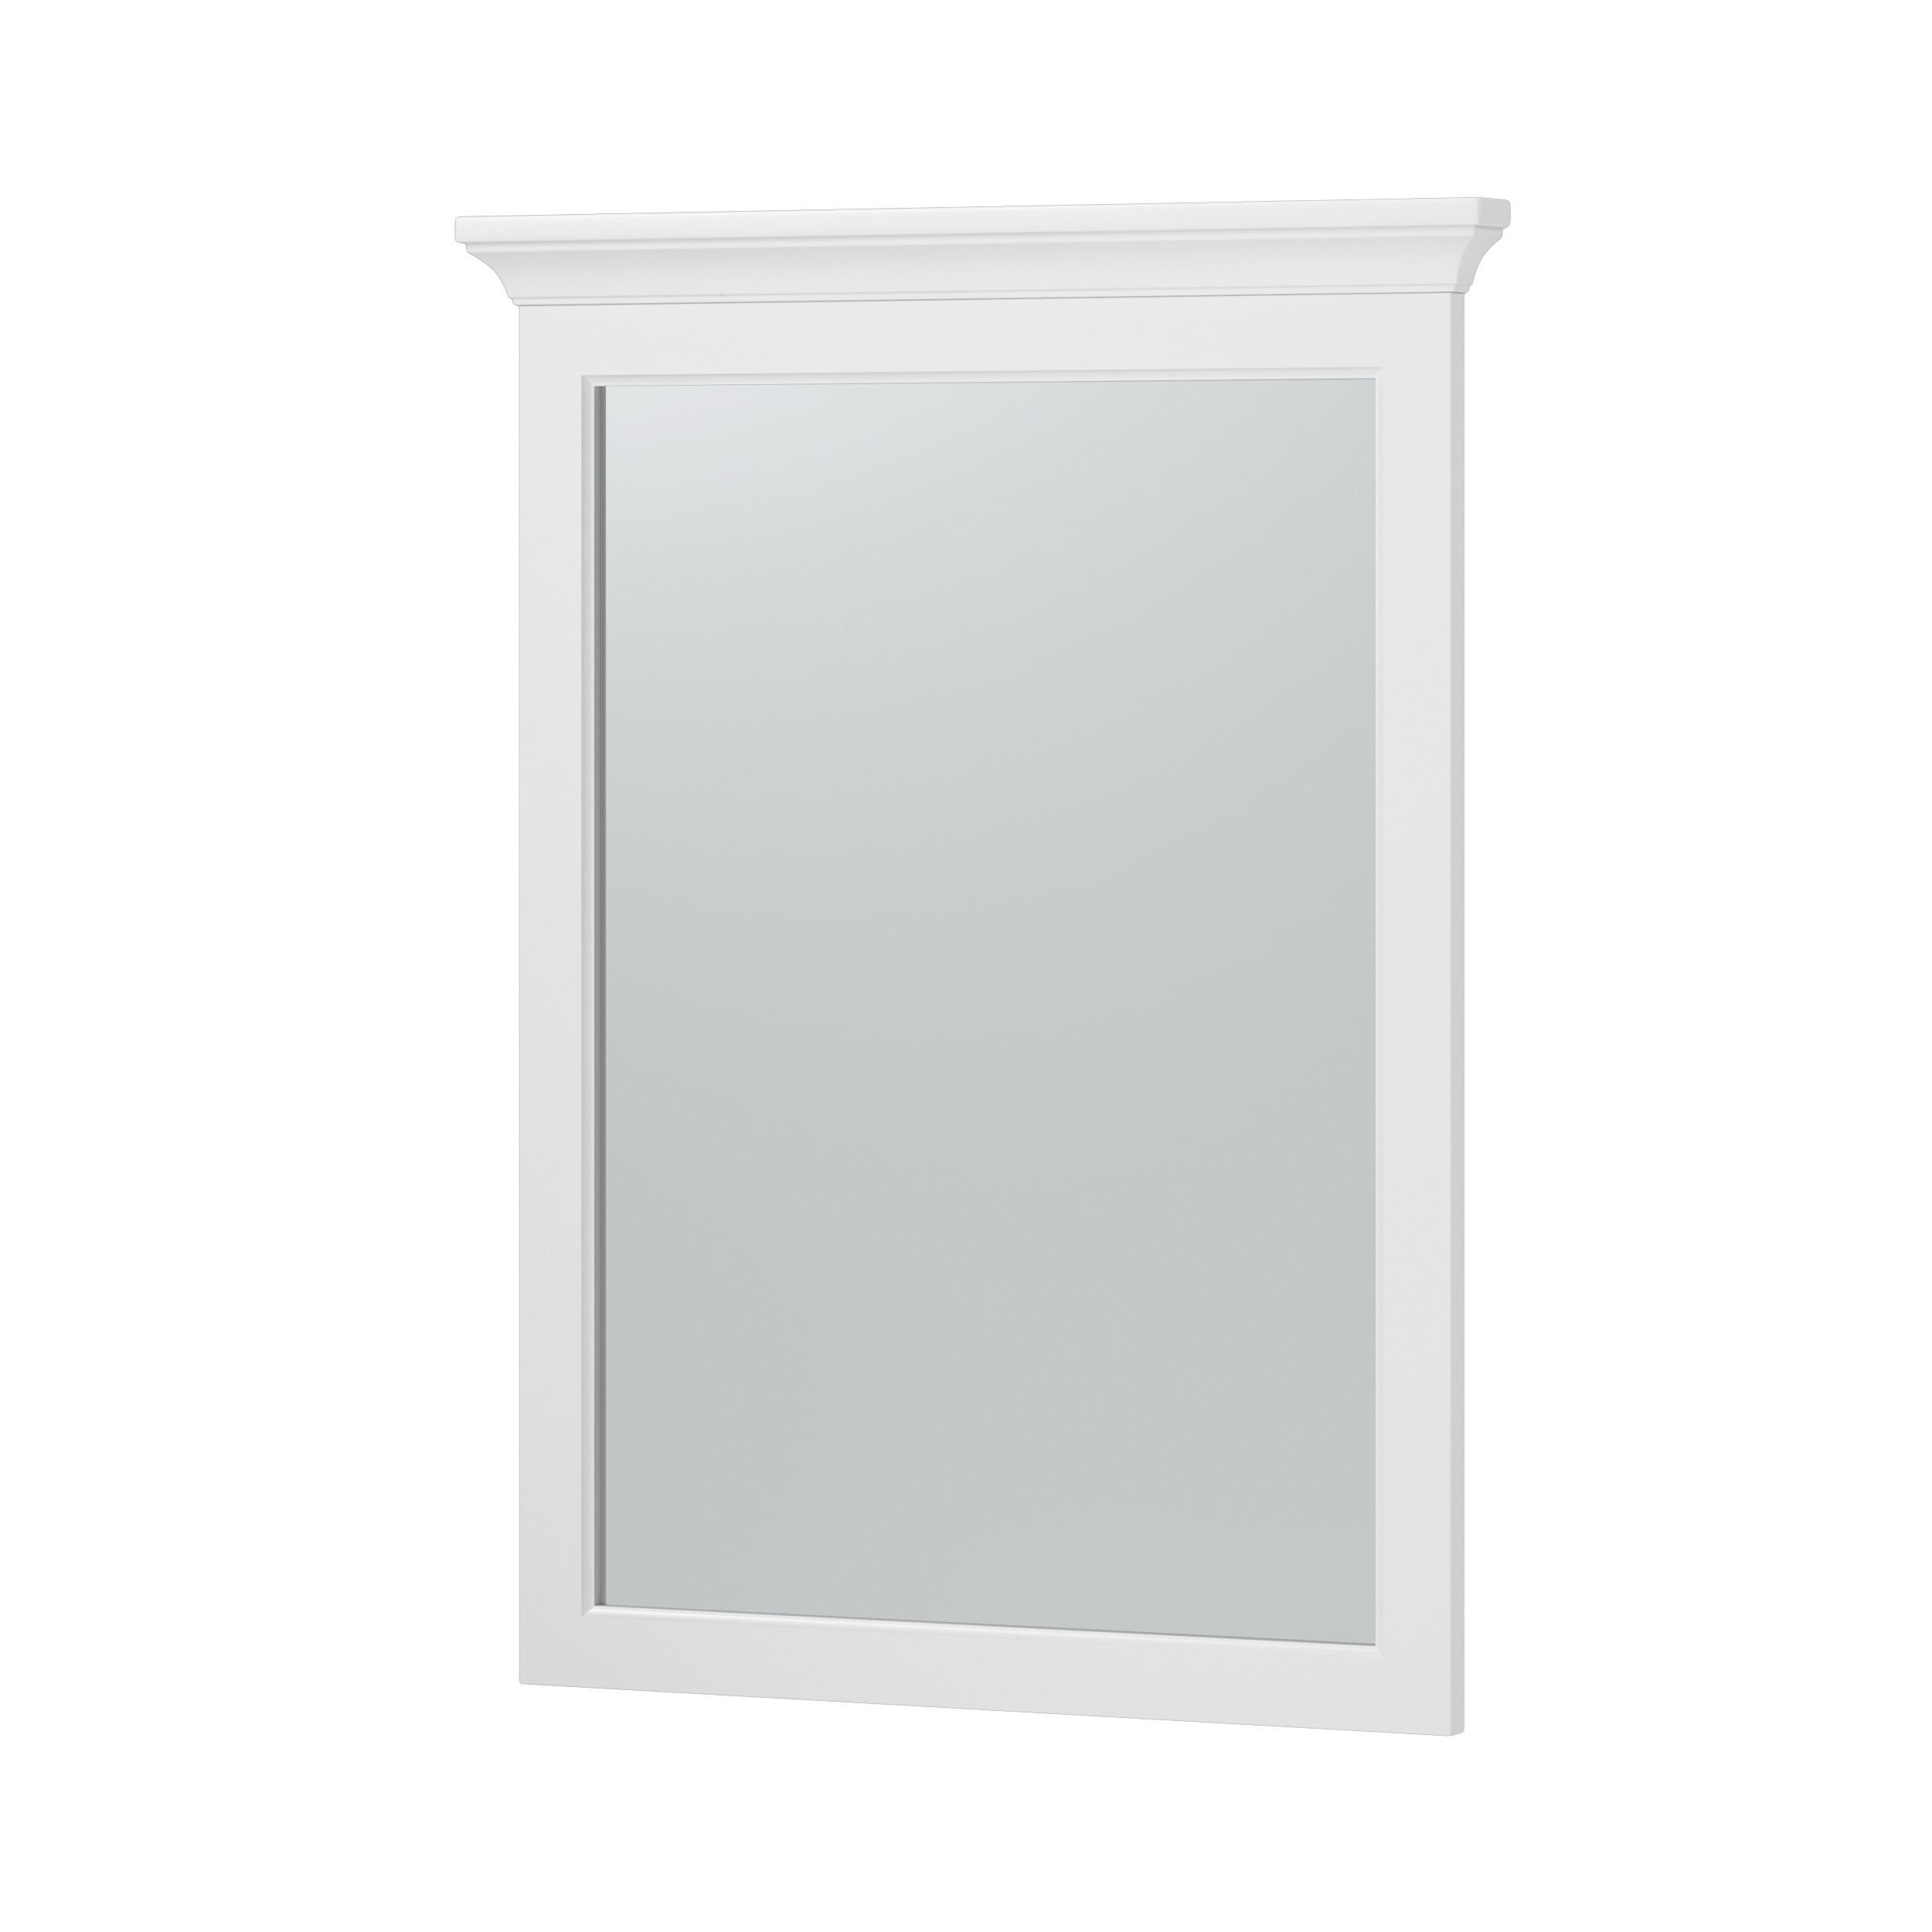 Hollis Series HOWM2432 Framed Mirror, 32 in L, 24 in W, White Frame, Hanging Installation